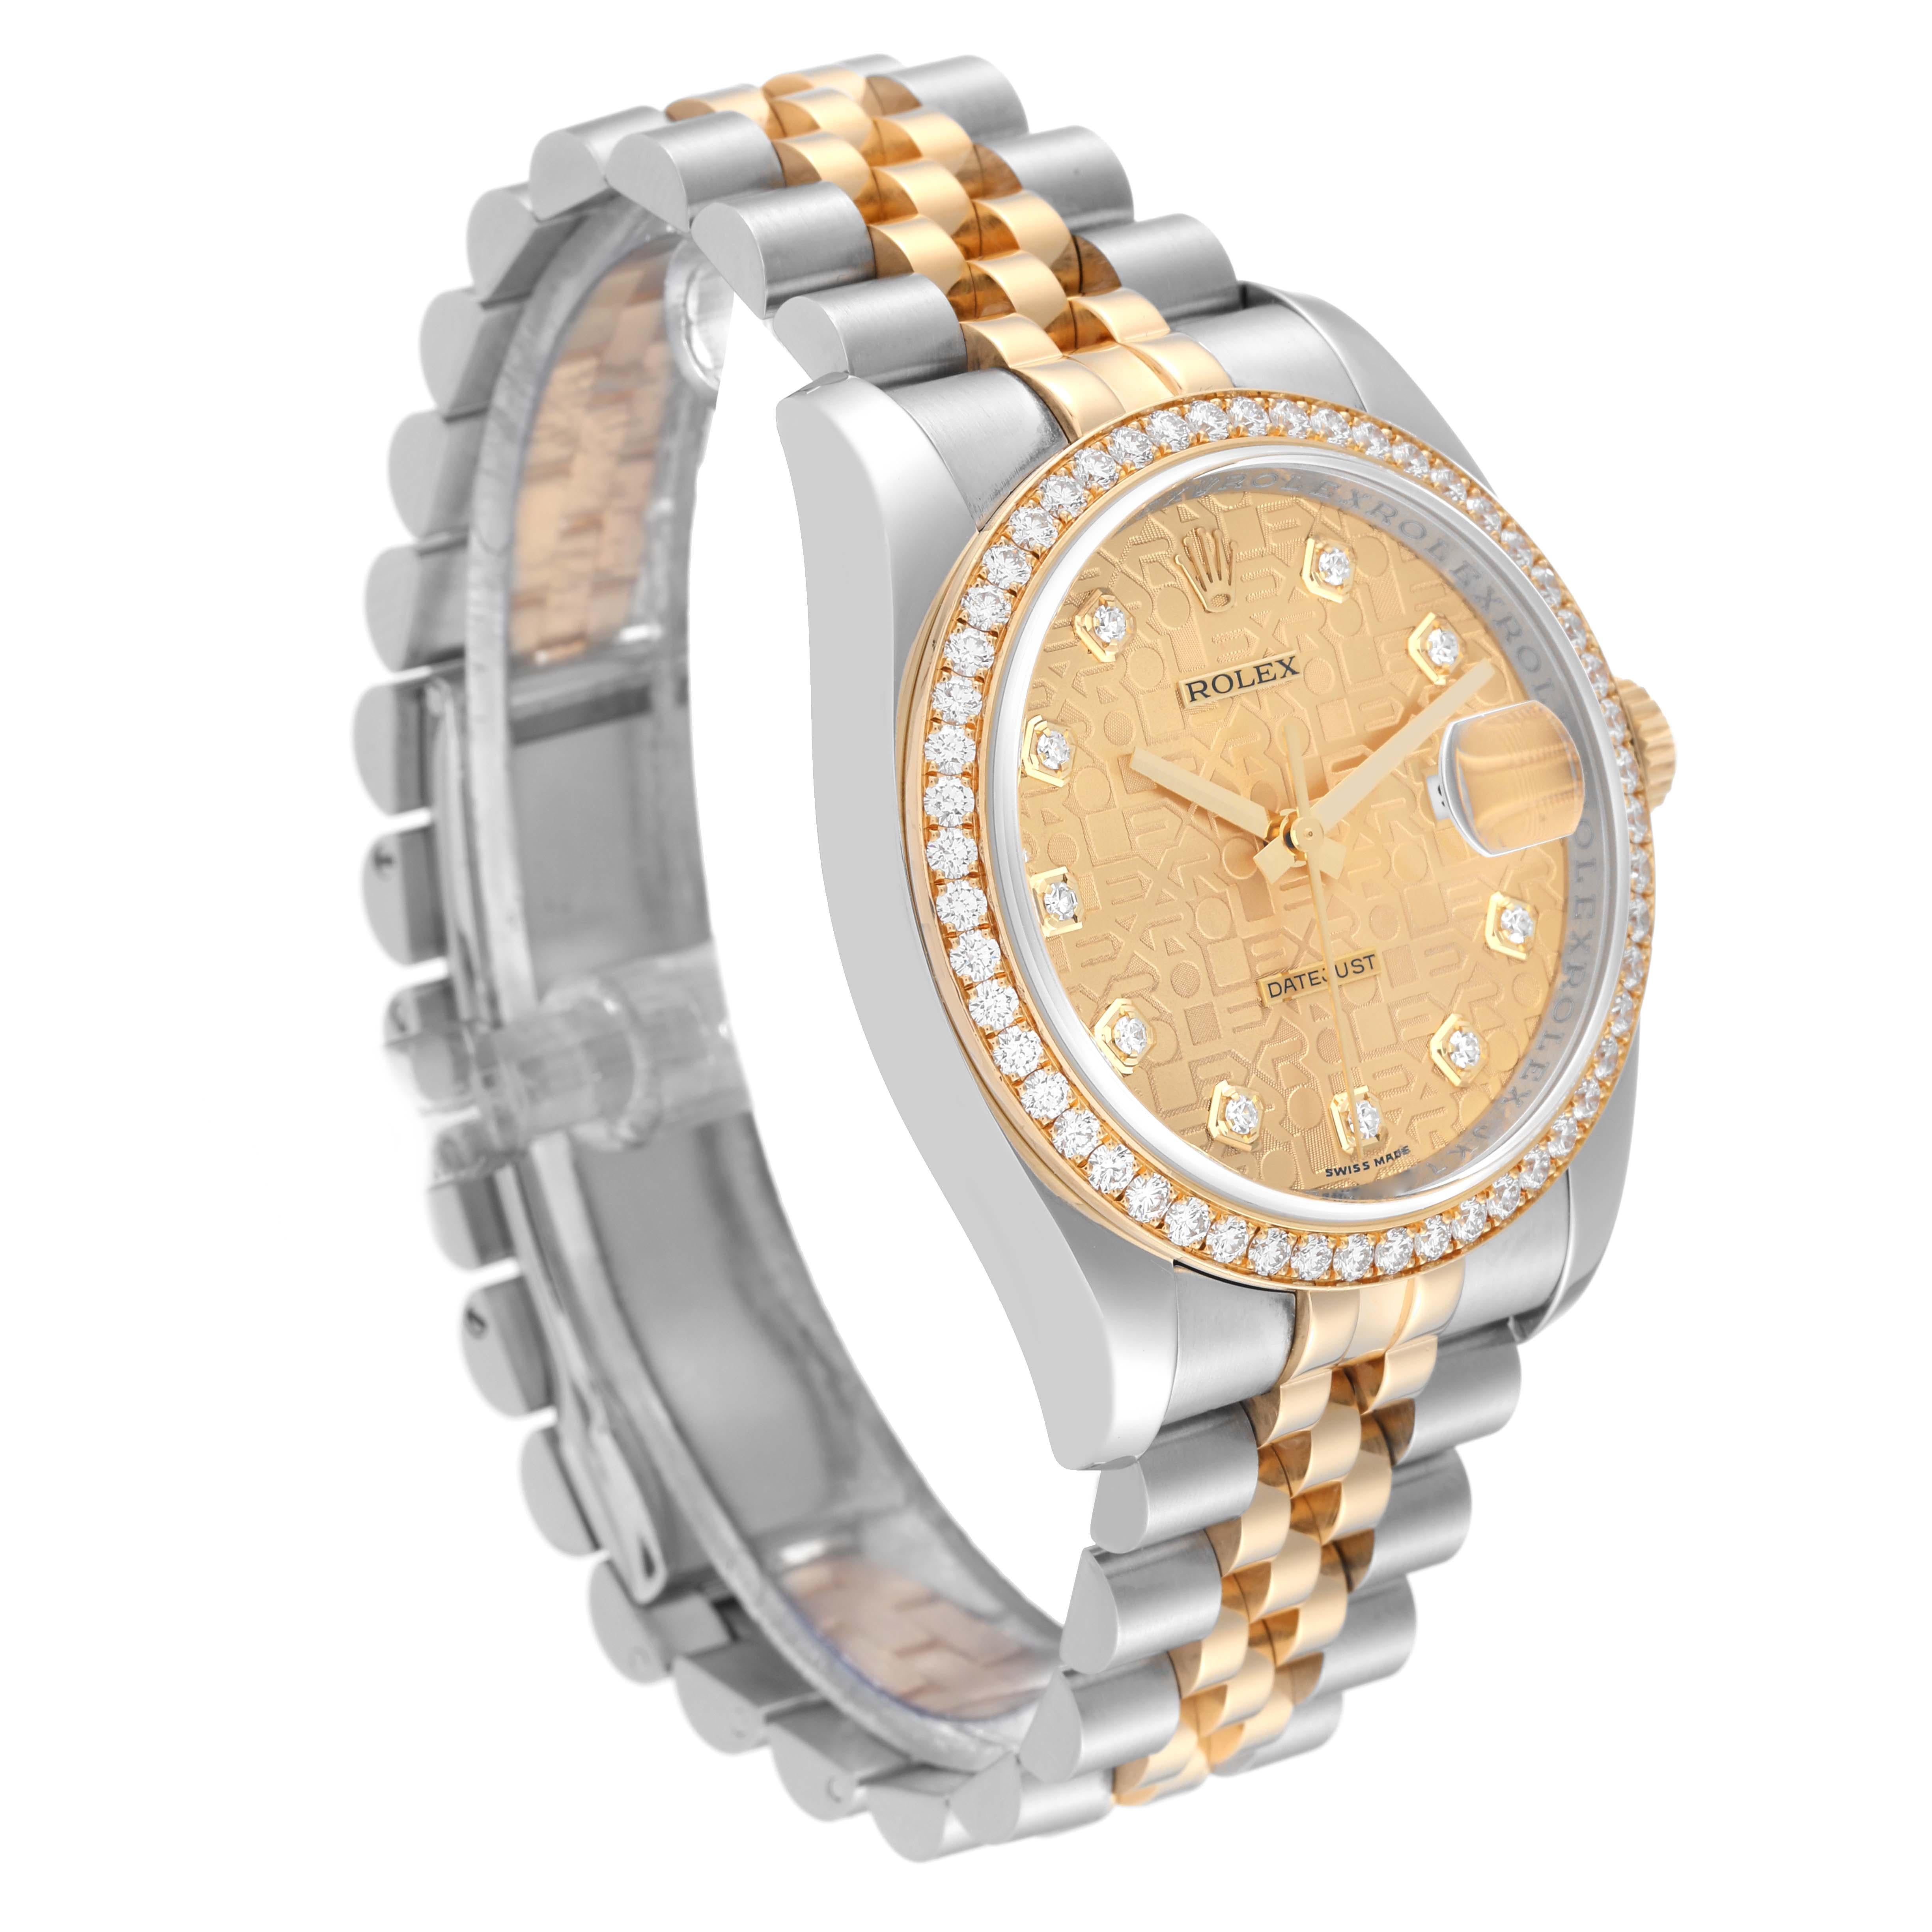 Rolex Datejust Anniversary Dial Steel Yellow Gold Diamond Men's Watch 116243 In Excellent Condition For Sale In Atlanta, GA